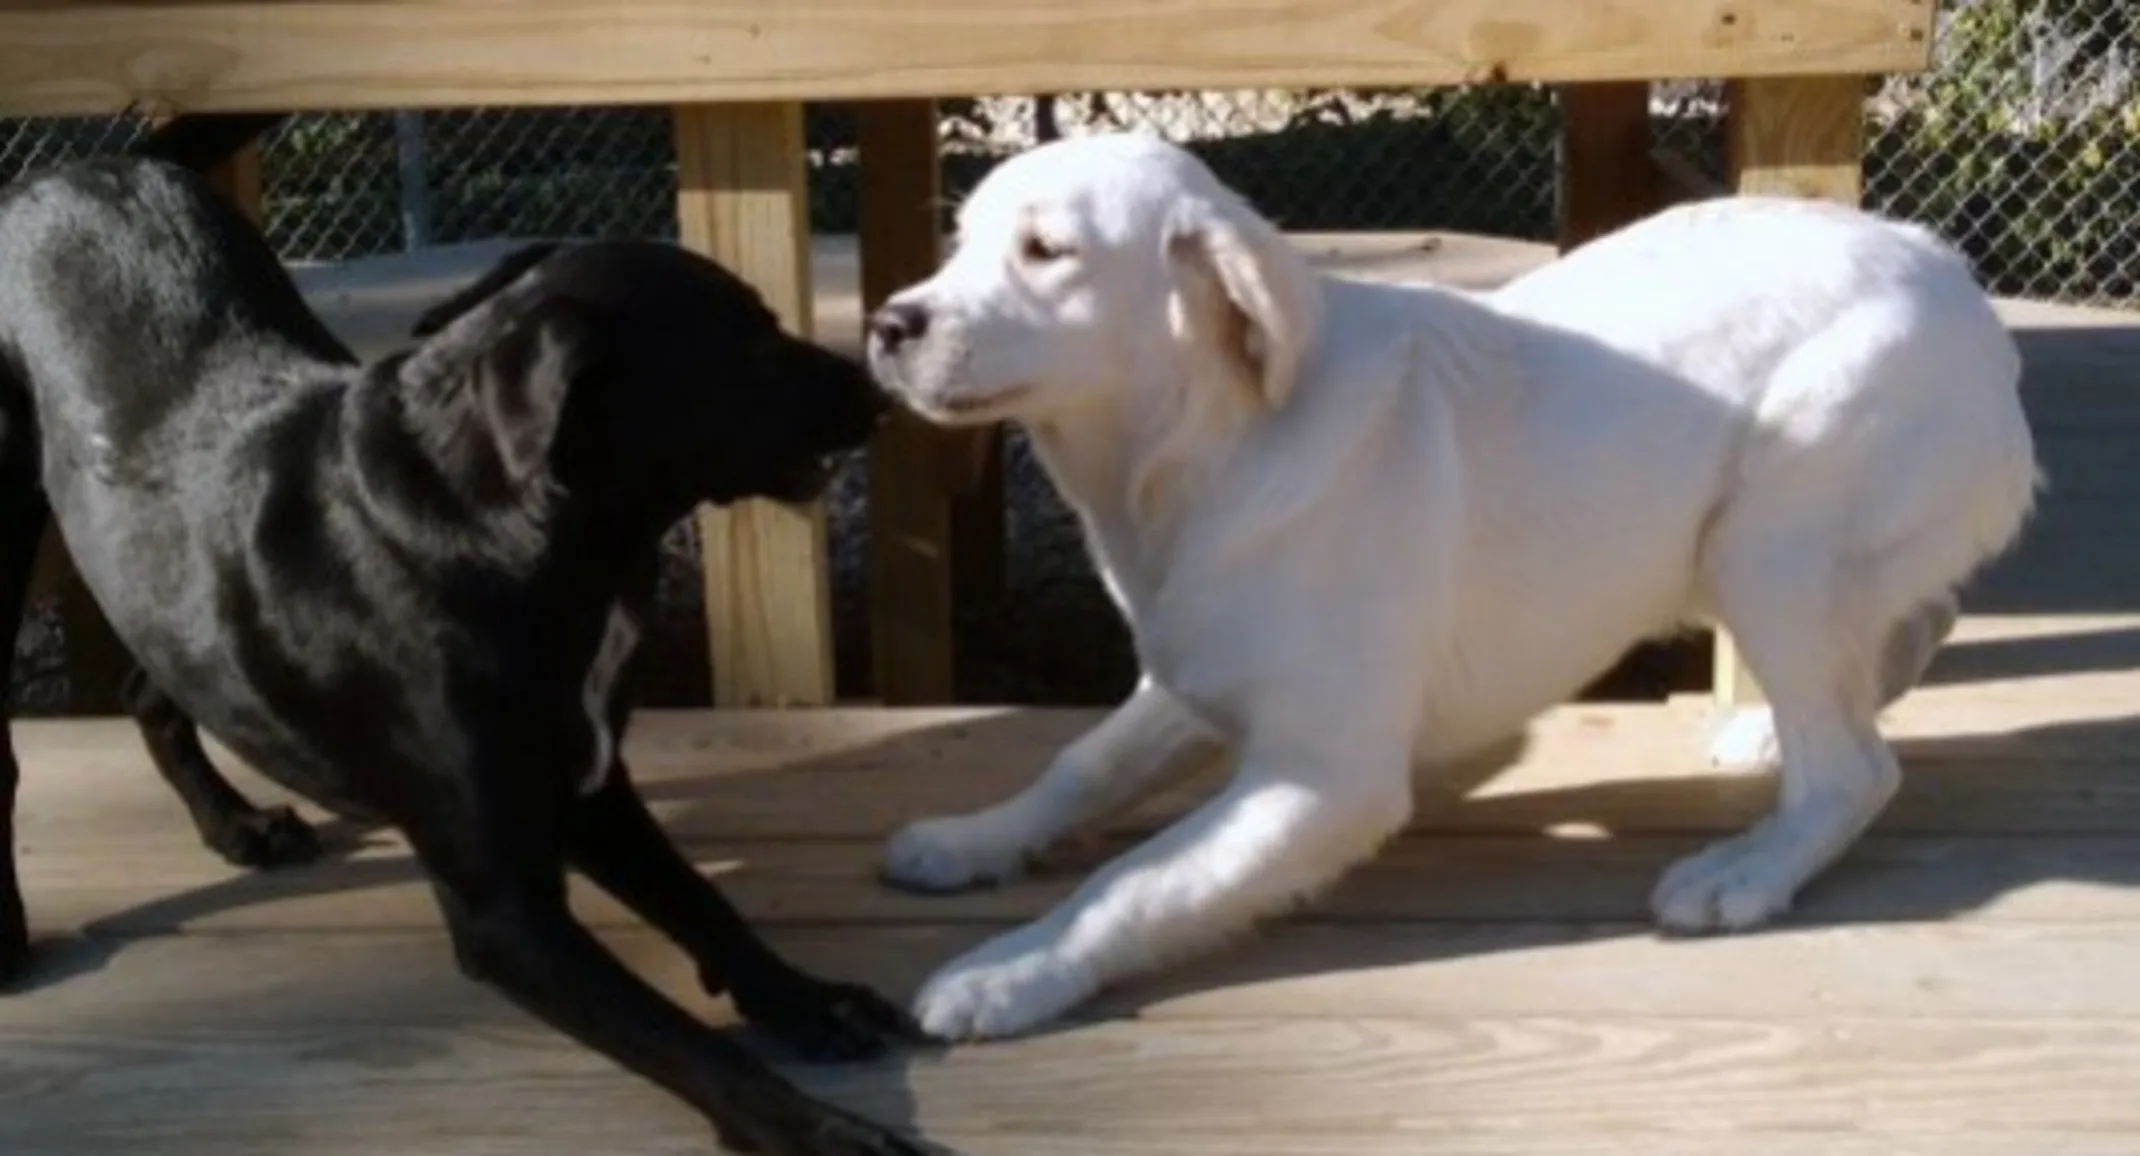 Two Dogs Meeting